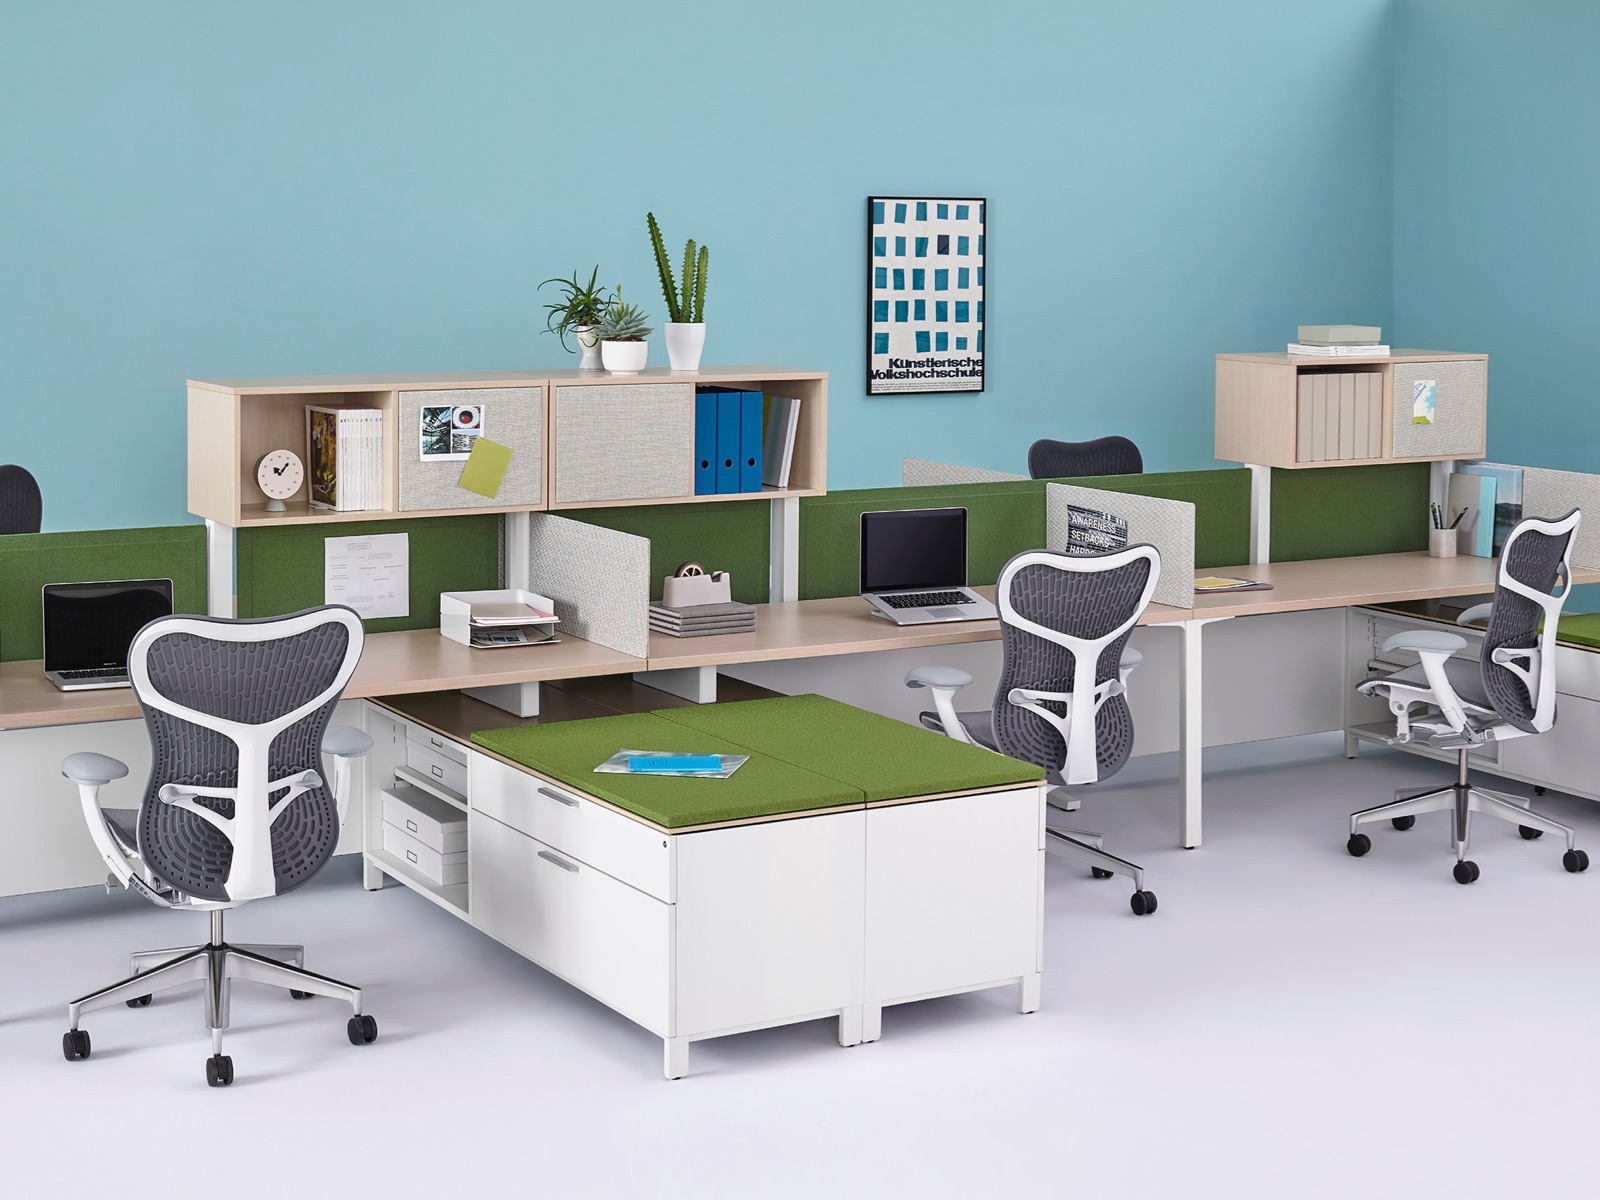 Canvas Dock workstations with surfaces and overheads in a light wood finish, green Pari privacy screens, and low storage with green cushioned tops.